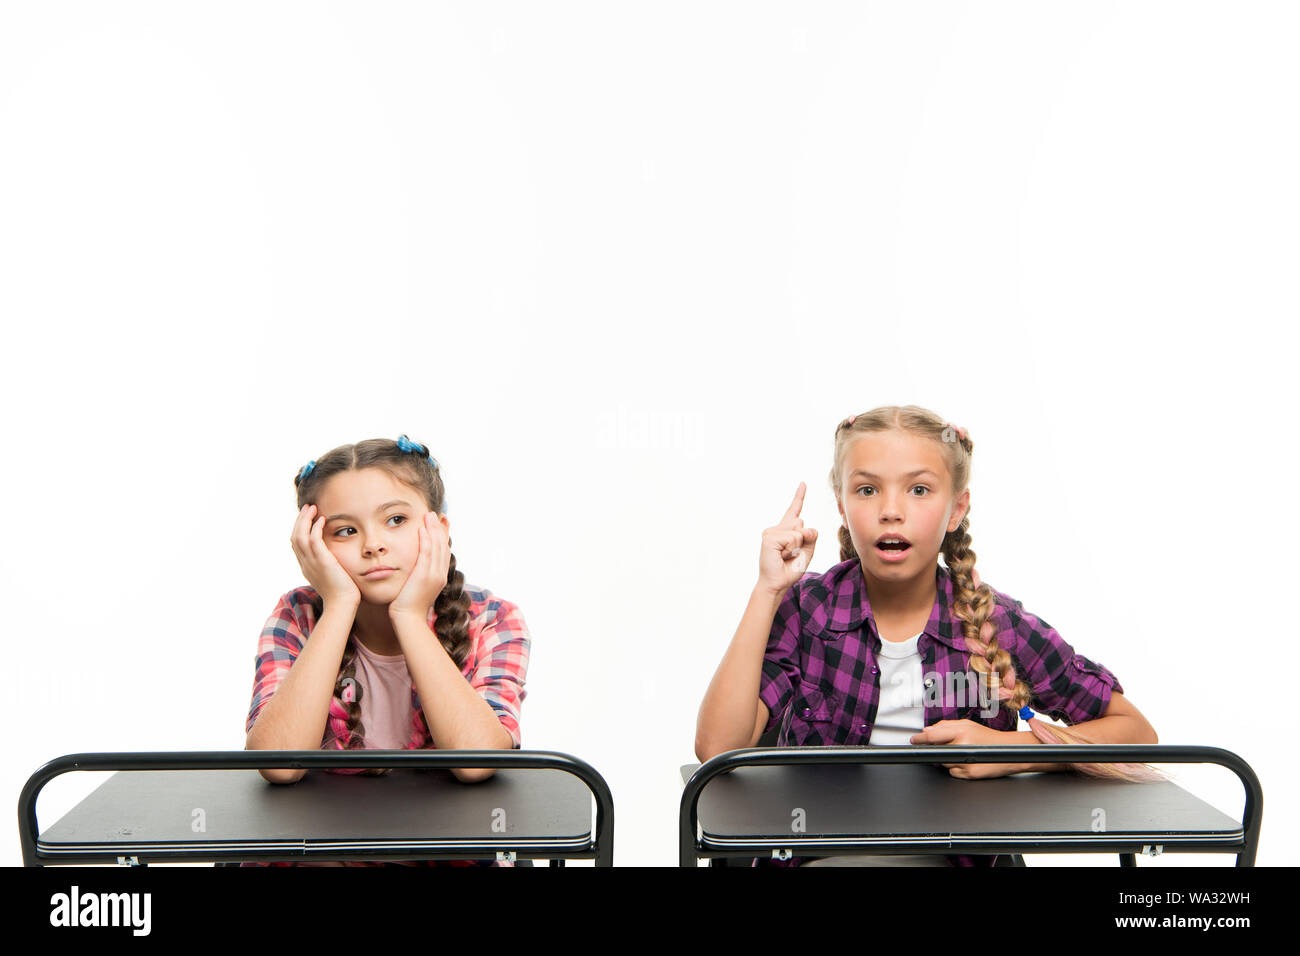 Alternative education idea. Cute children sitting at desks isolated on white. Small girls learning in school of primary education. Little kids getting formal education. Compulsory education is free. Stock Photo